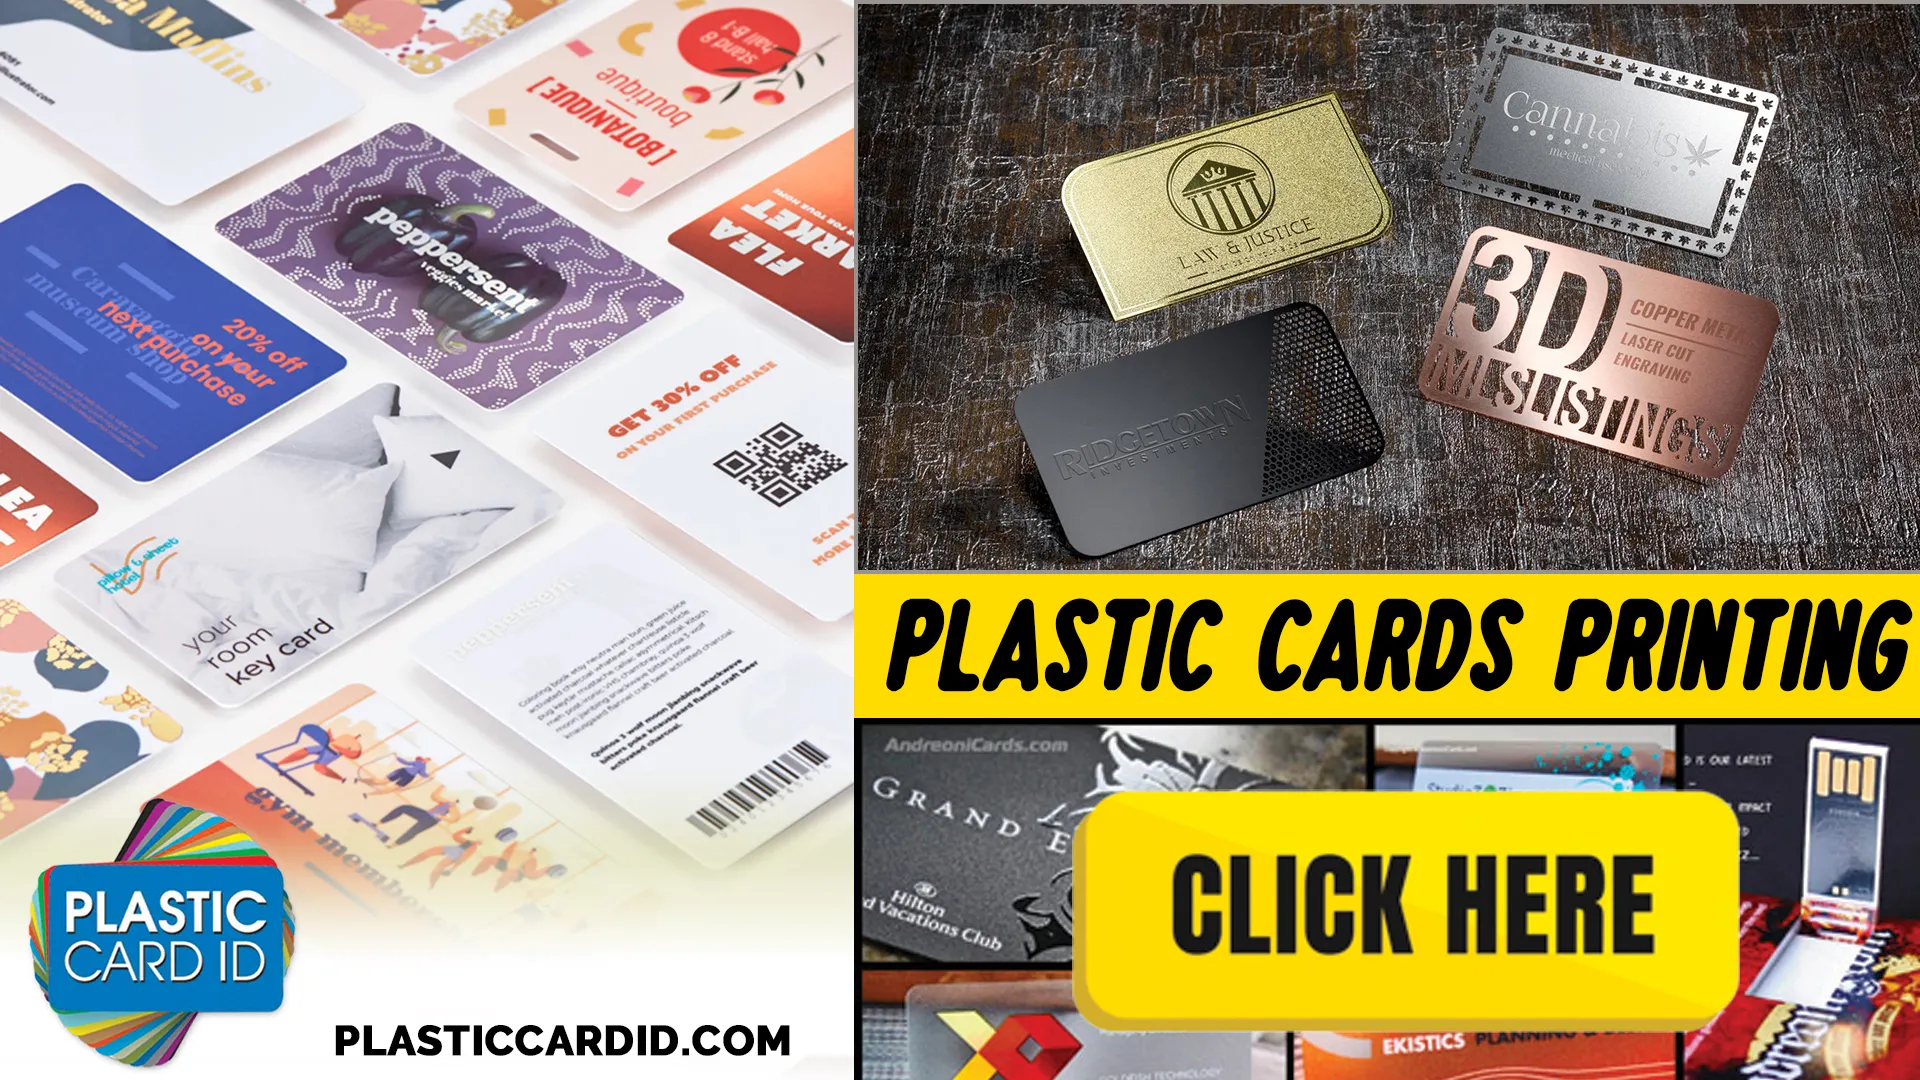 The End-to-End Service Experience at Plastic Card ID




